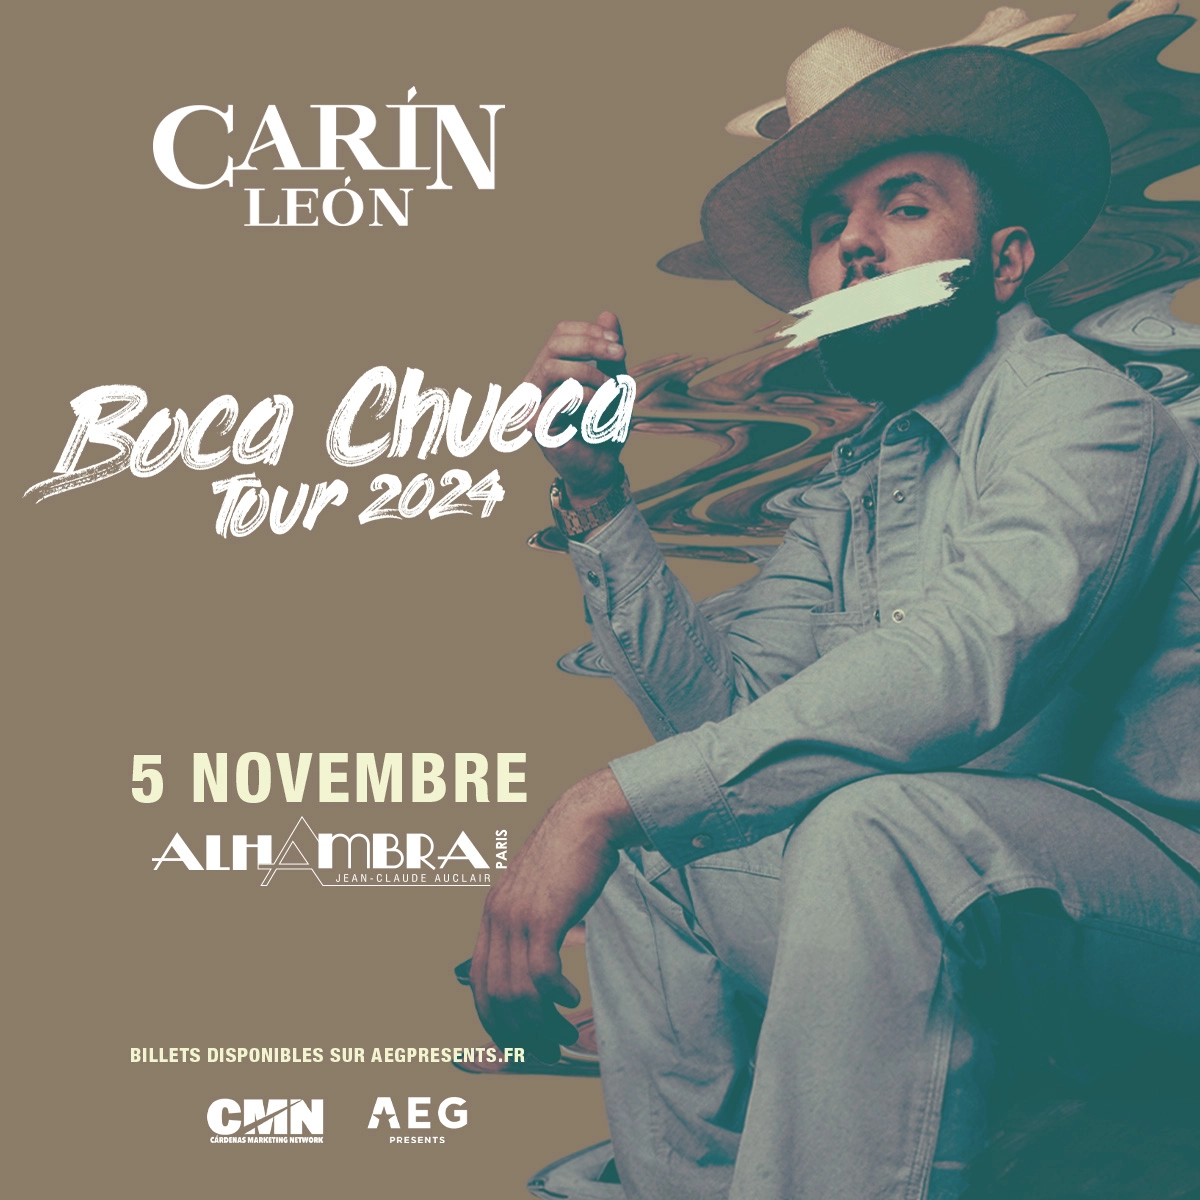 Carin Leon at Alhambra Tickets